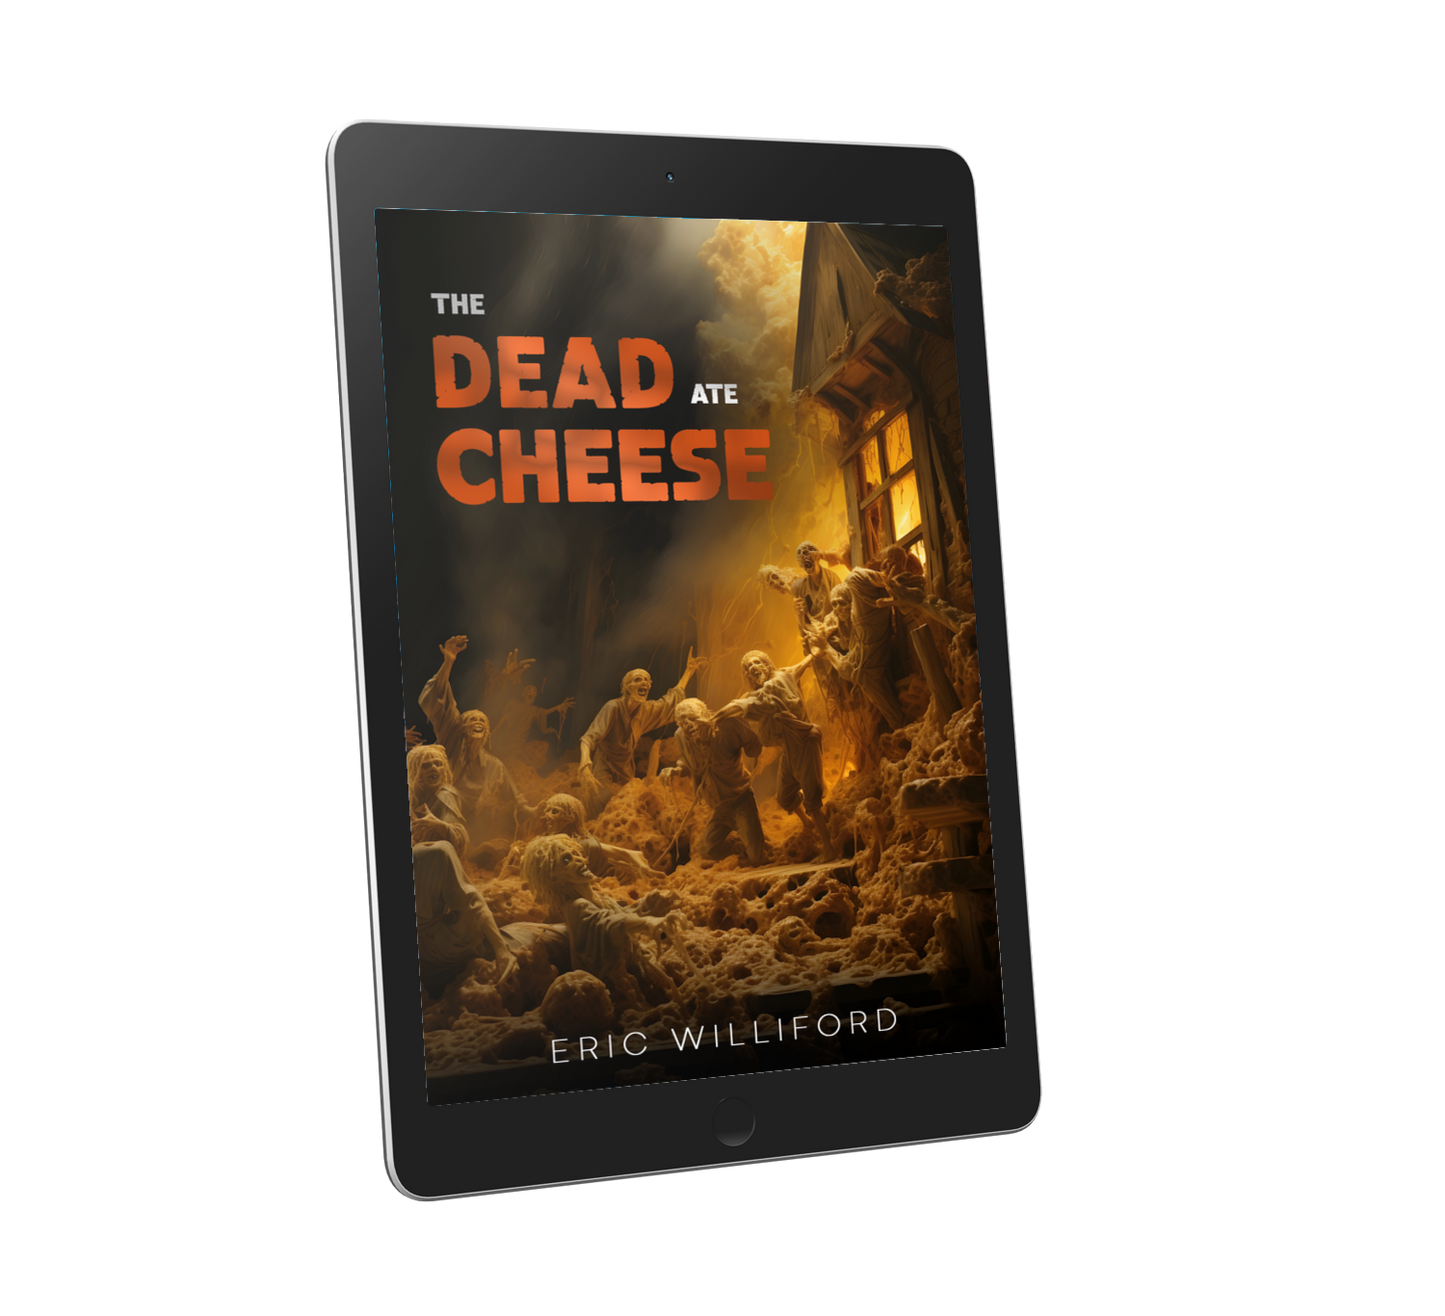 The Dead Ate Cheese - Ebook